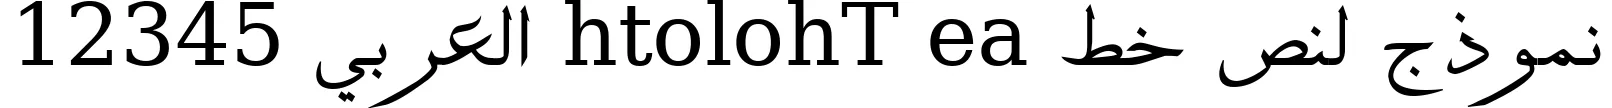 Dynamic ae Tholoth Font Preview https://safirsoft.com